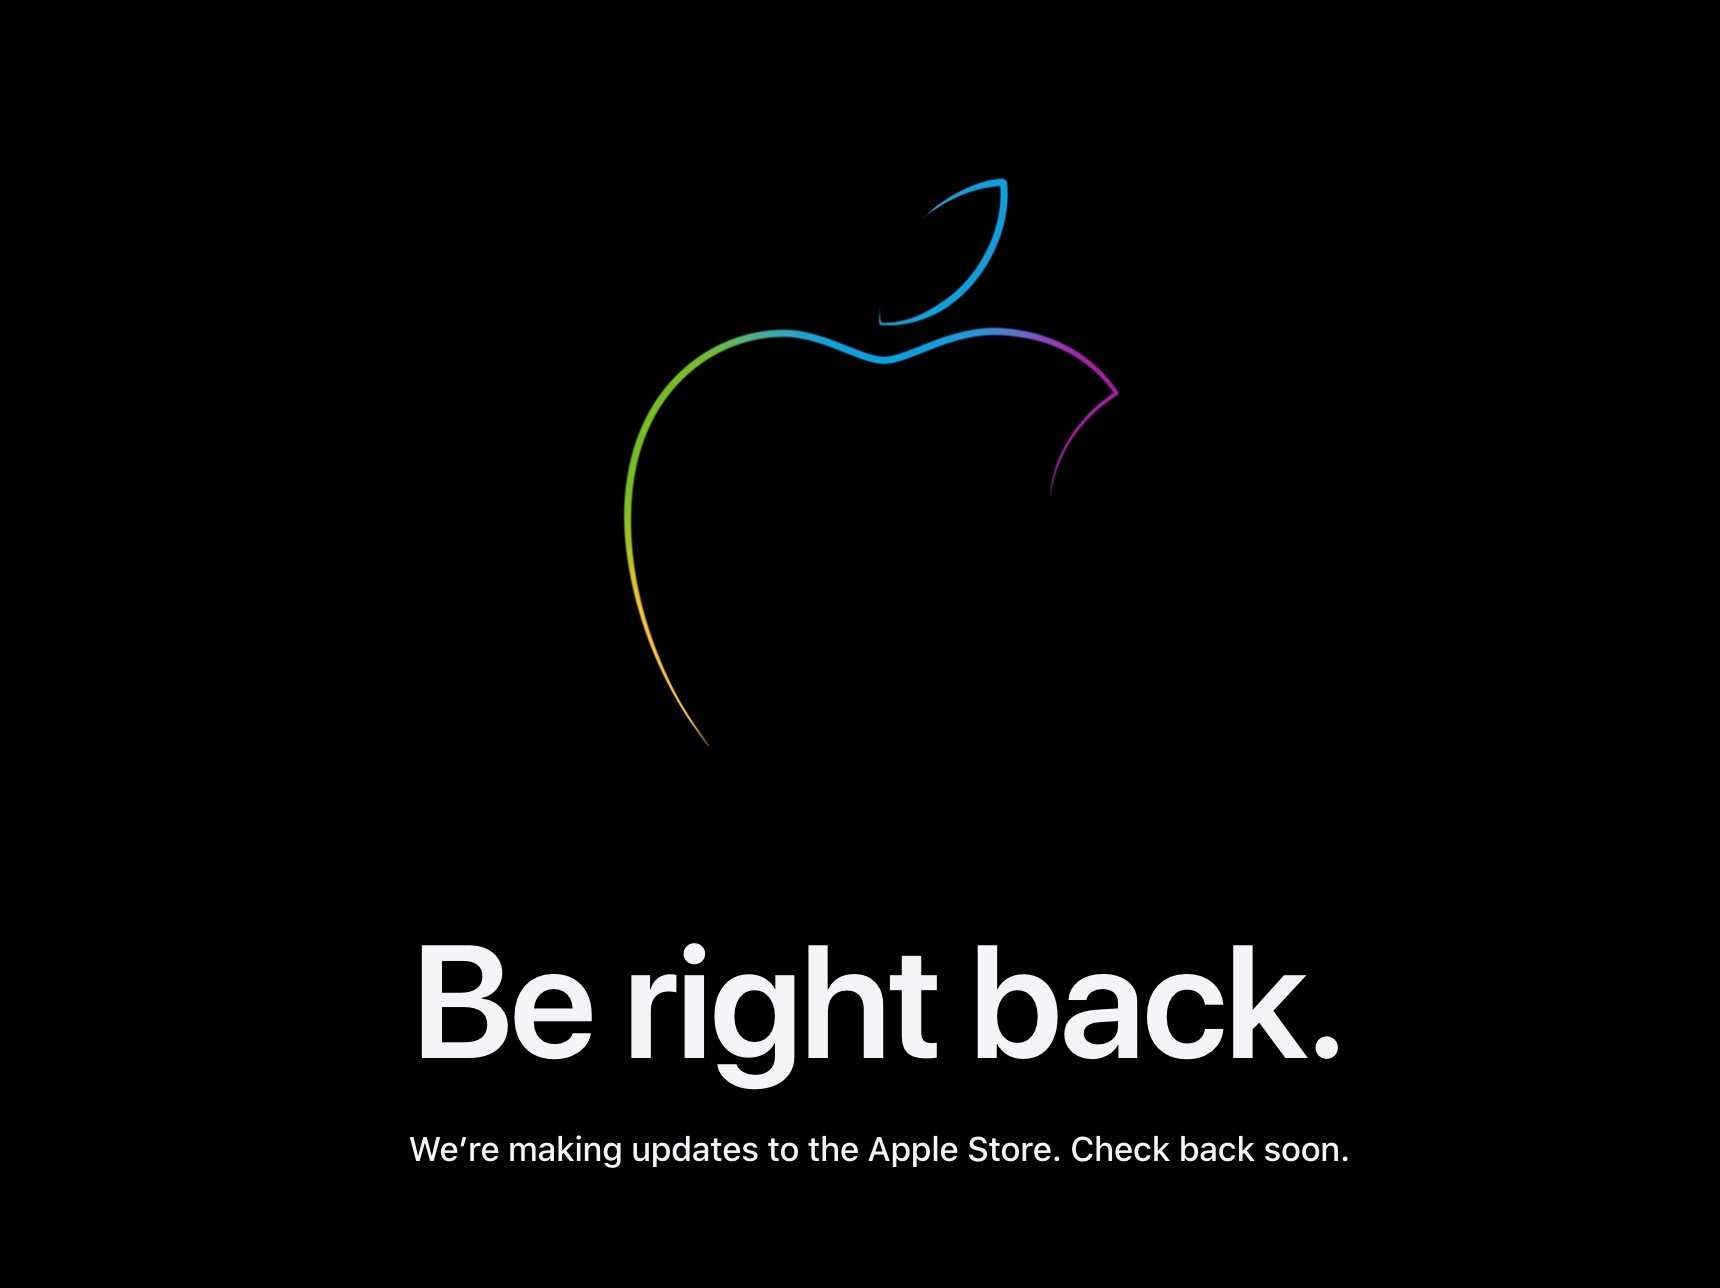 Apple Store Be right back